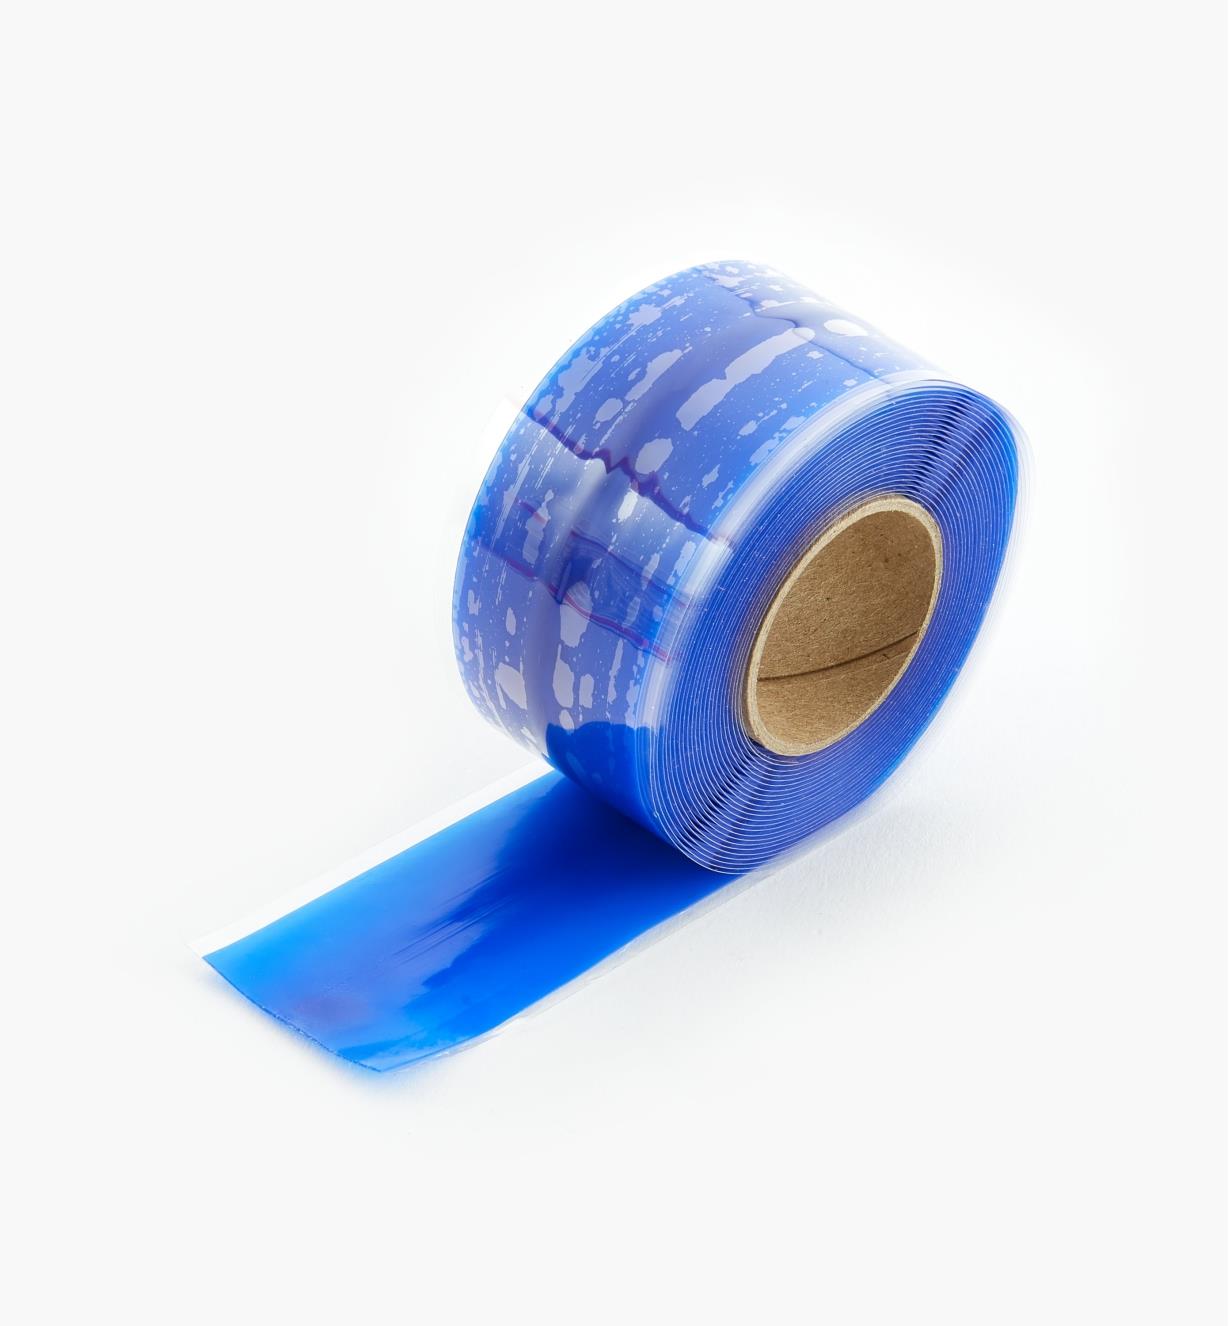 23K3011 - Blue Silicone Tape, 1" x 10'